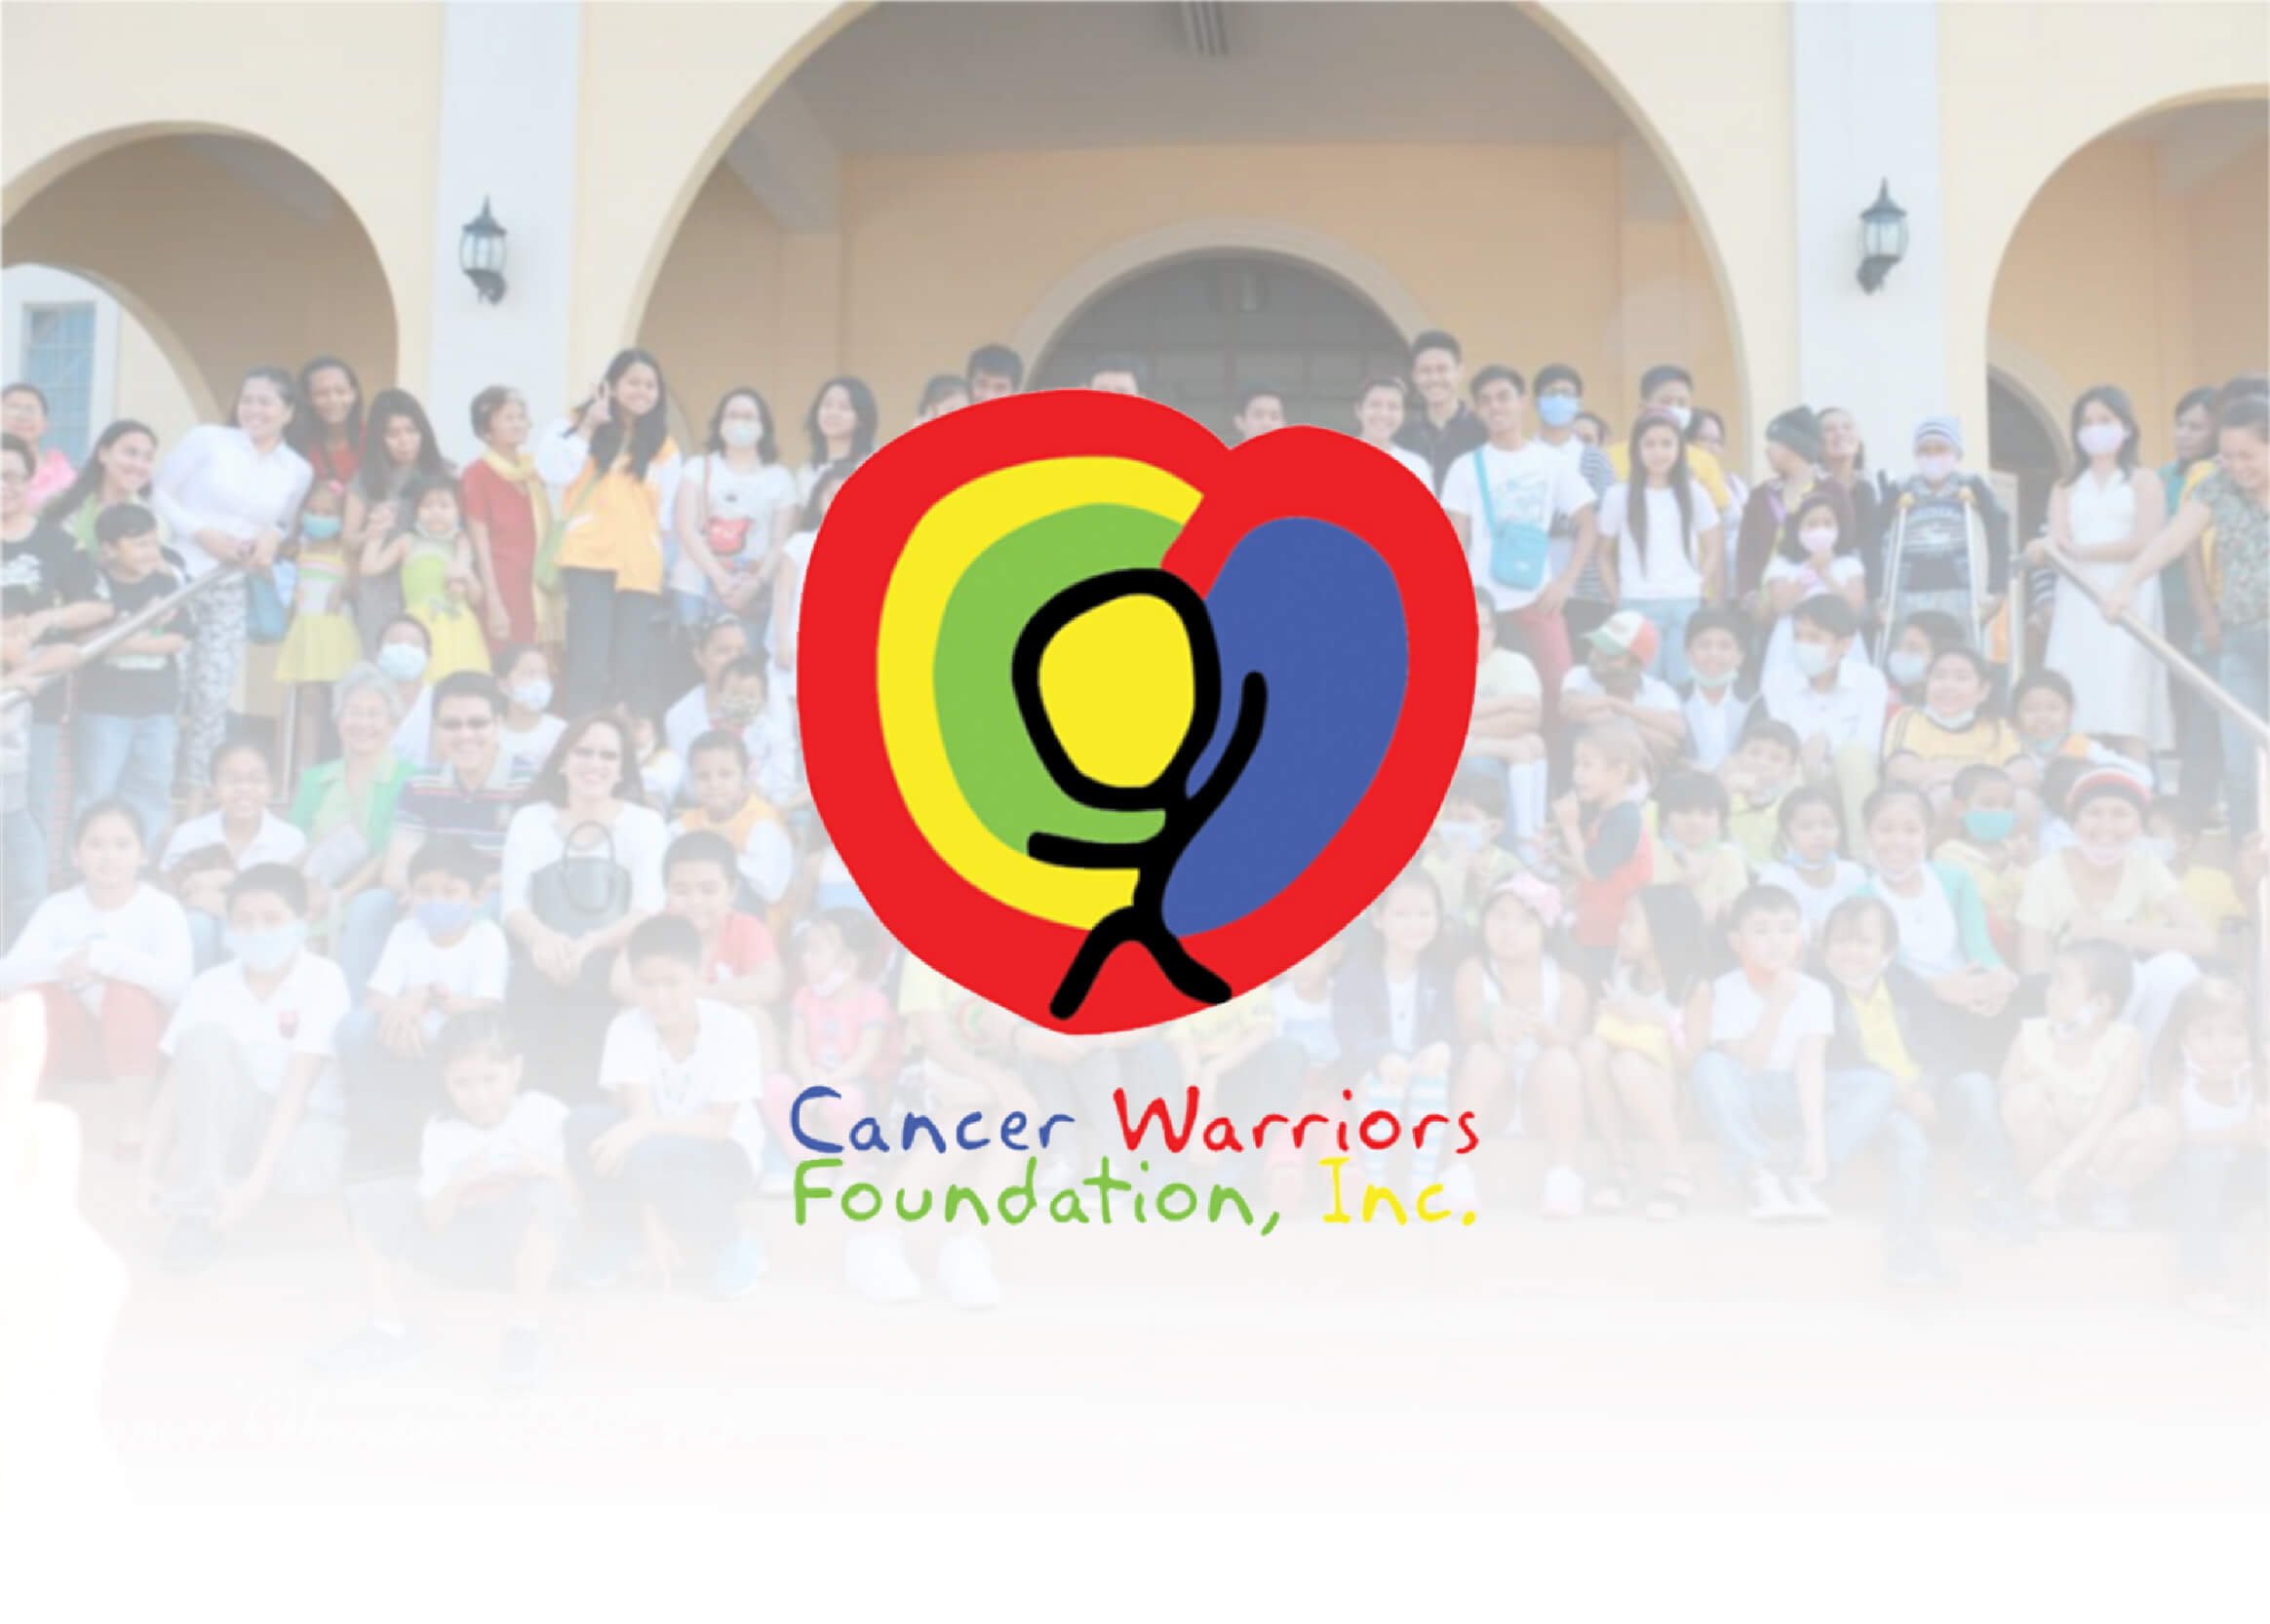 Maxicare supports the needs of childhood cancer survivors through Cancer Warriors Foundation